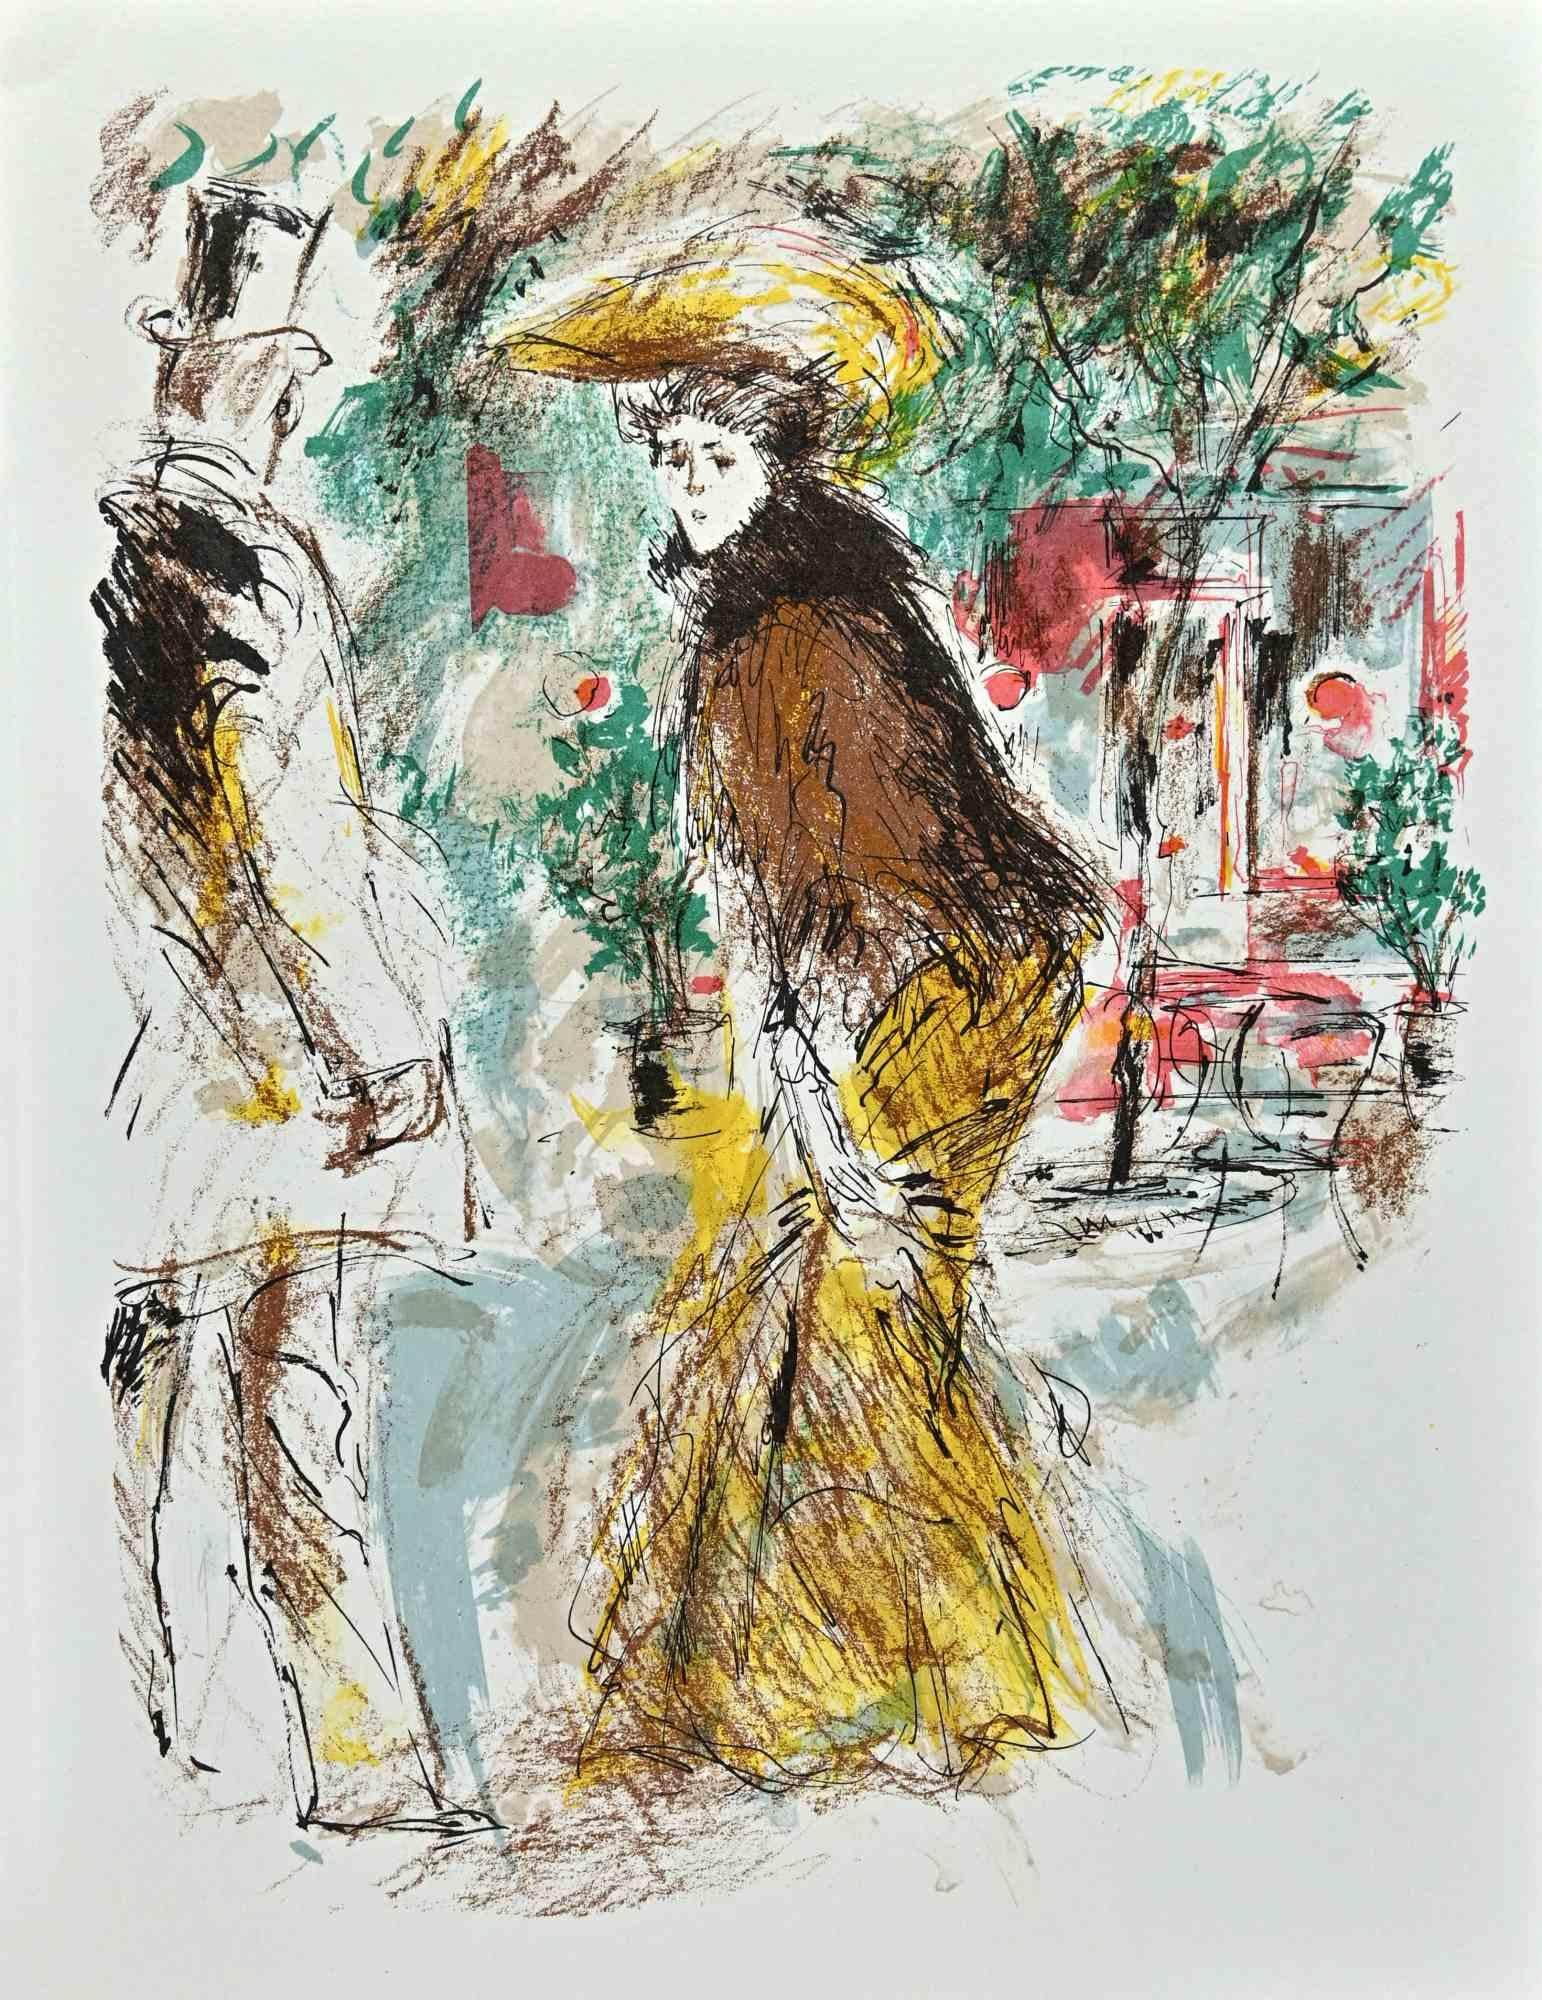 Walking - Original Lithograph by Jacques Pecnard - Mid-20th Century